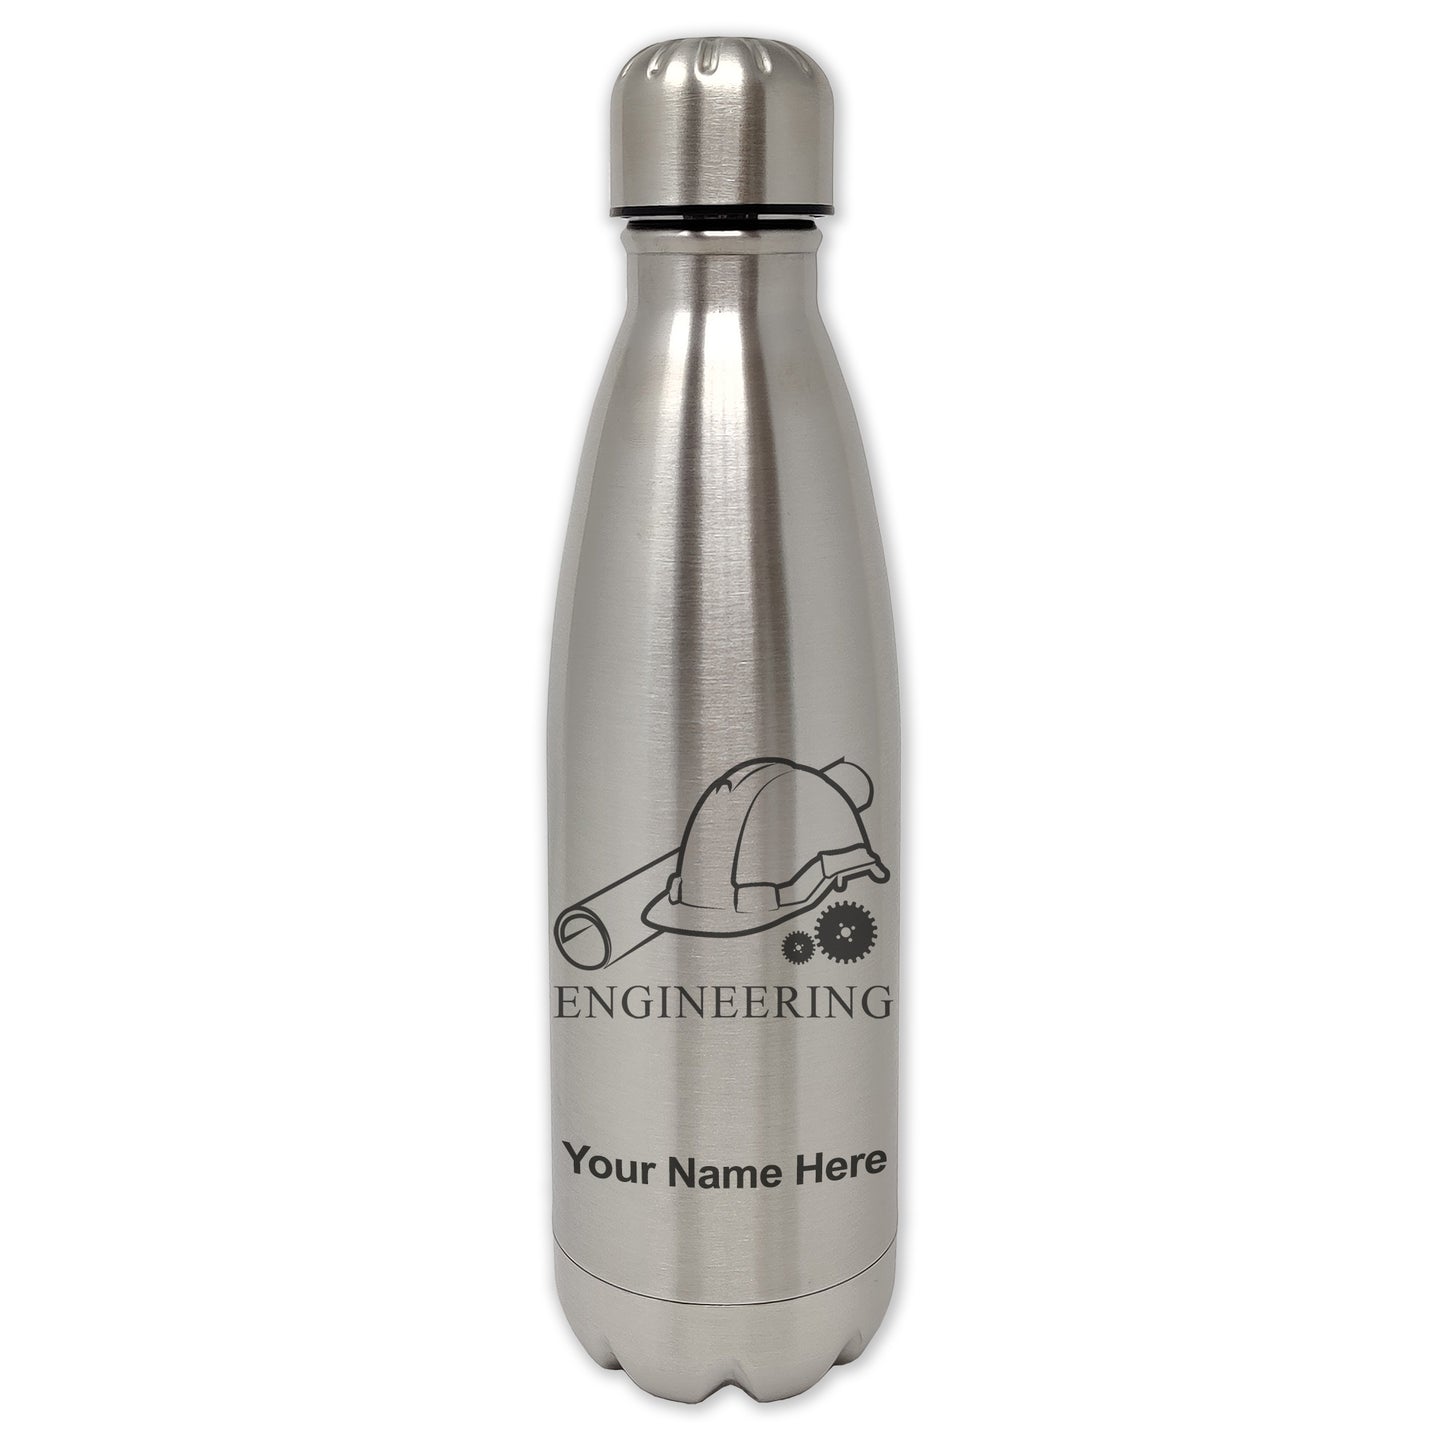 LaserGram Single Wall Water Bottle, Engineering, Personalized Engraving Included